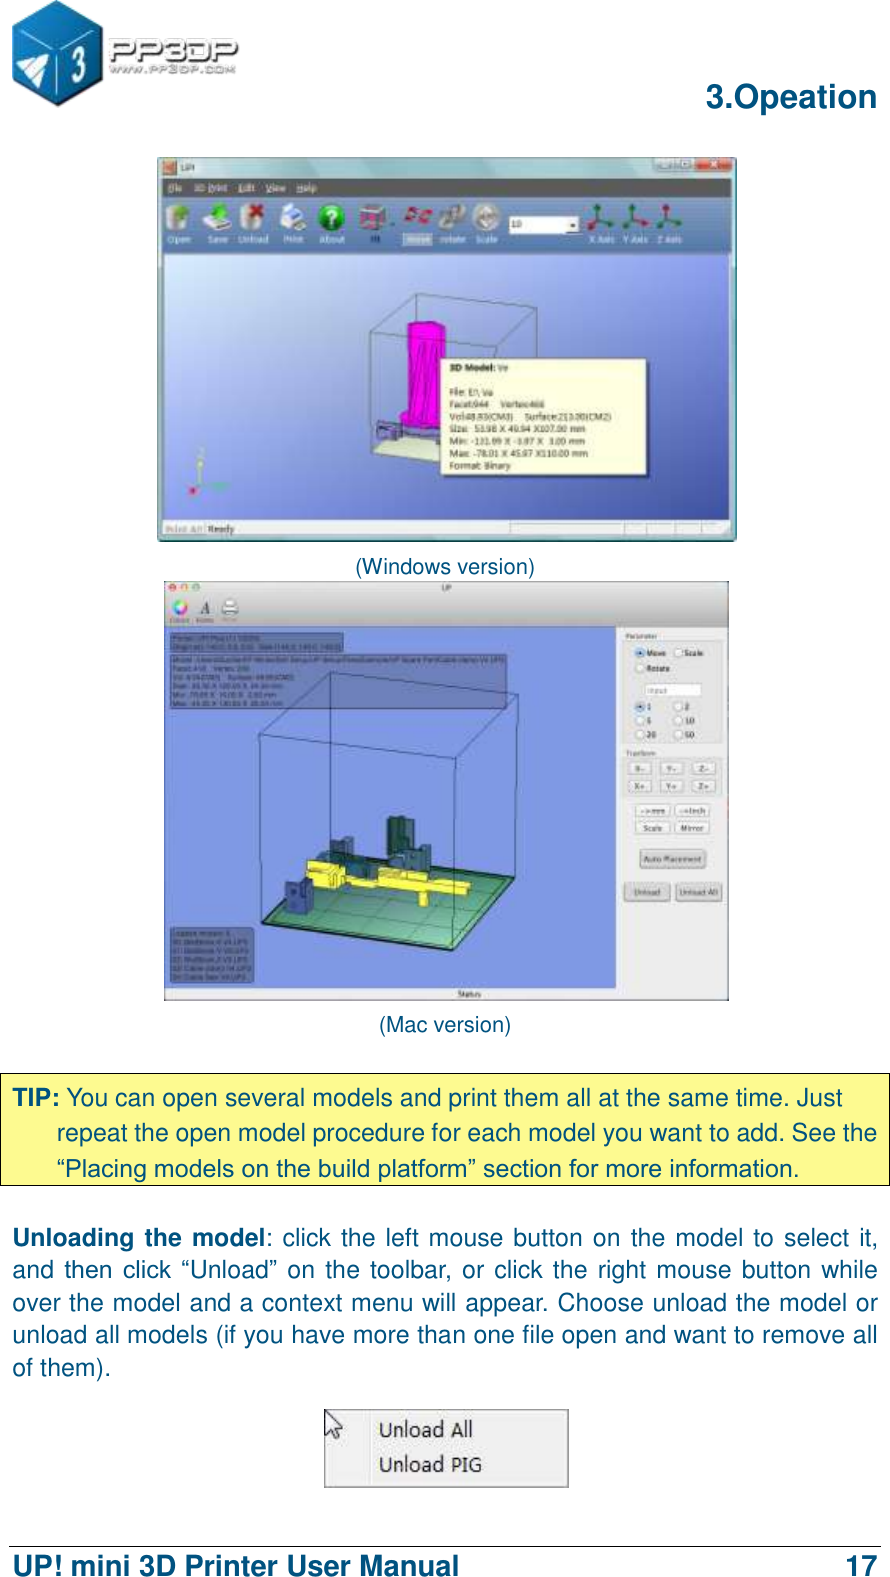      3.Opeation  UP! mini 3D Printer User Manual                                17  (Windows version)  (Mac version)  TIP: You can open several models and print them all at the same time. Just repeat the open model procedure for each model you want to add. See the “Placing models on the build platform” section for more information.  Unloading the model: click the left mouse button on the model to select it, and then  click  “Unload” on the toolbar, or click the right mouse button while over the model and a context menu will appear. Choose unload the model or unload all models (if you have more than one file open and want to remove all of them).  